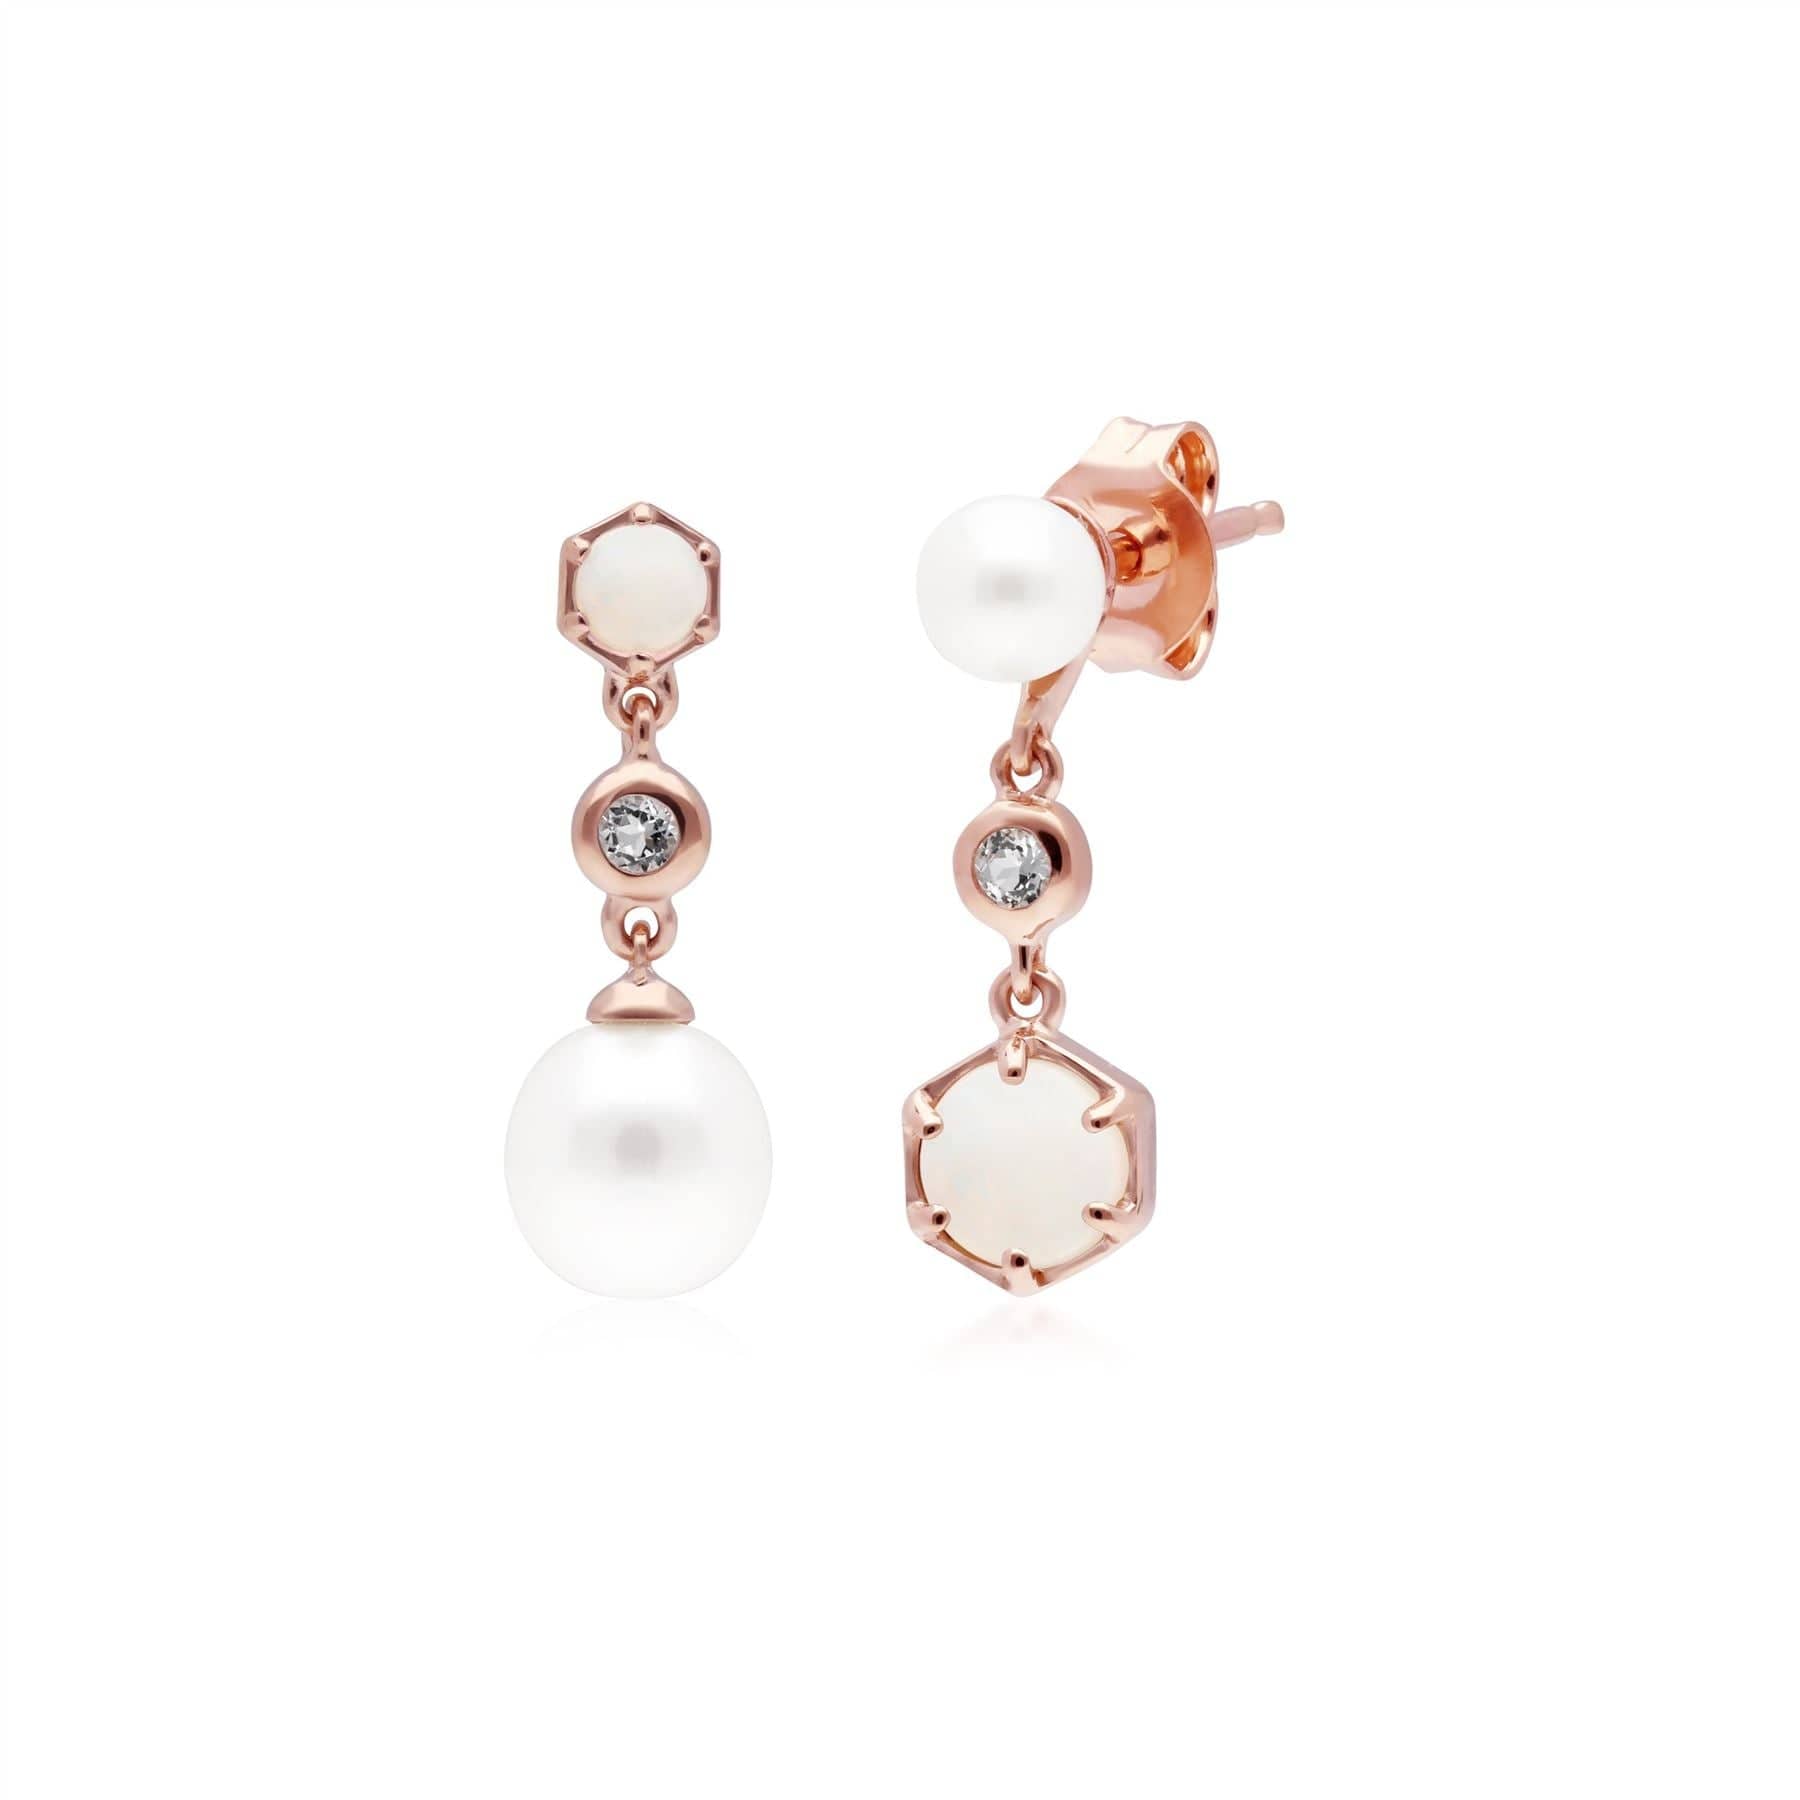 Modern Pearl, Opal & Topaz Mismatched Drop Earrings in Rose Gold Plated Sterling Silver